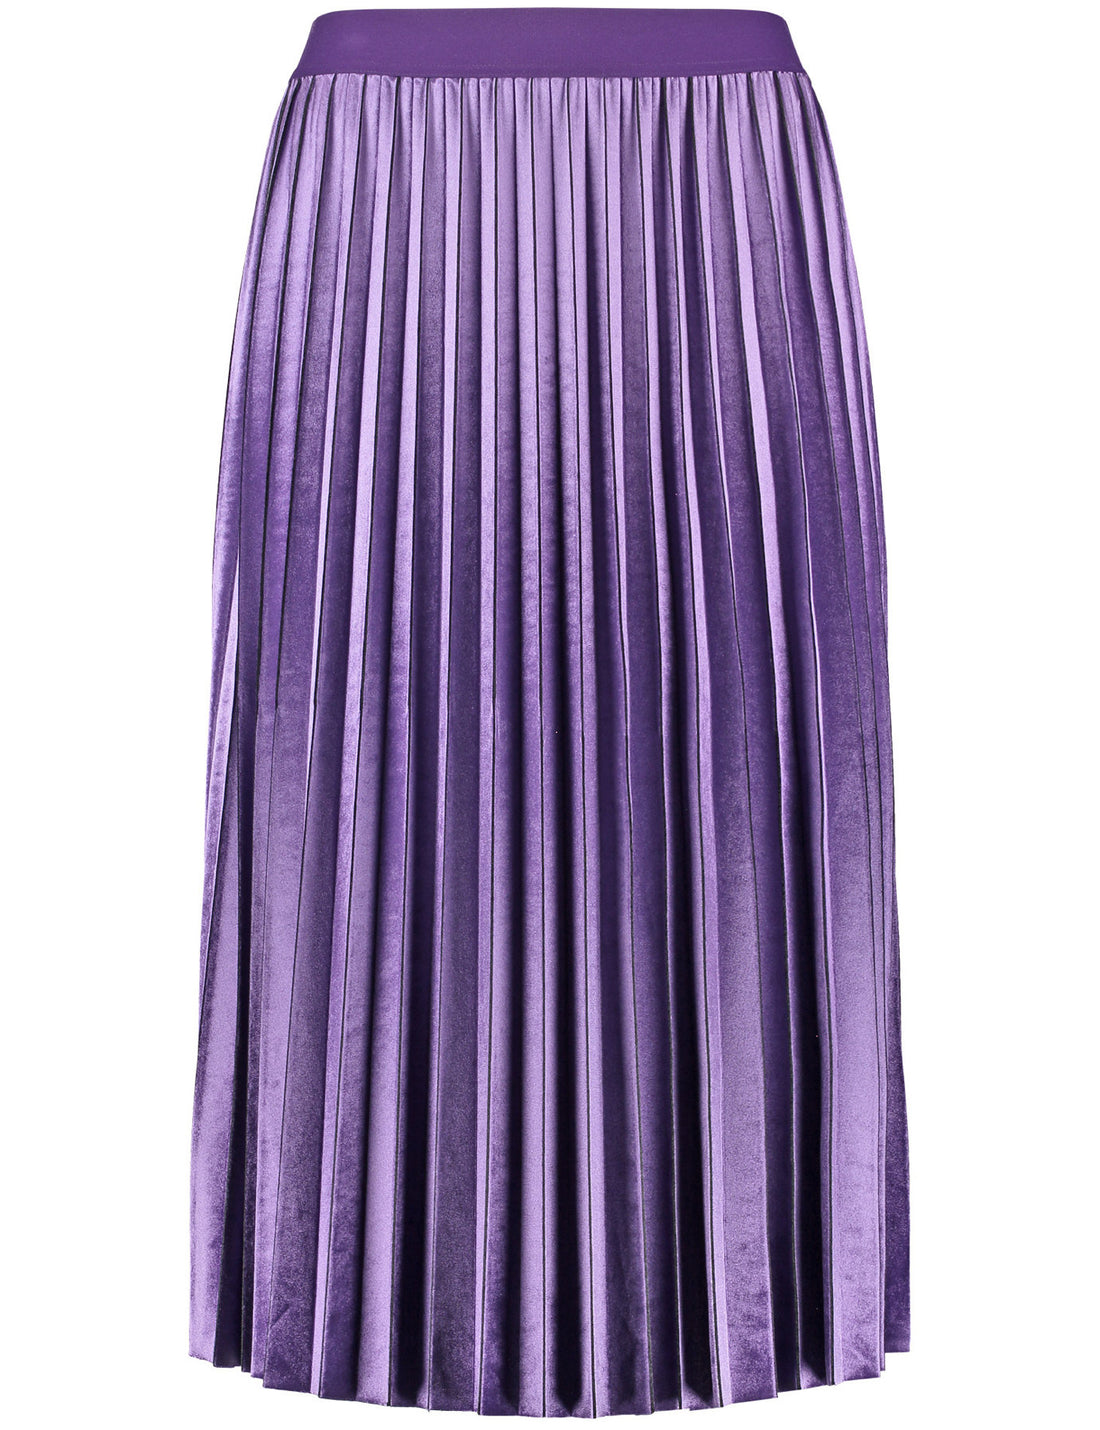 Pleated Skirt With A Subtle Shimmer And An Elasticated Waistband_210036-31531_30909_02